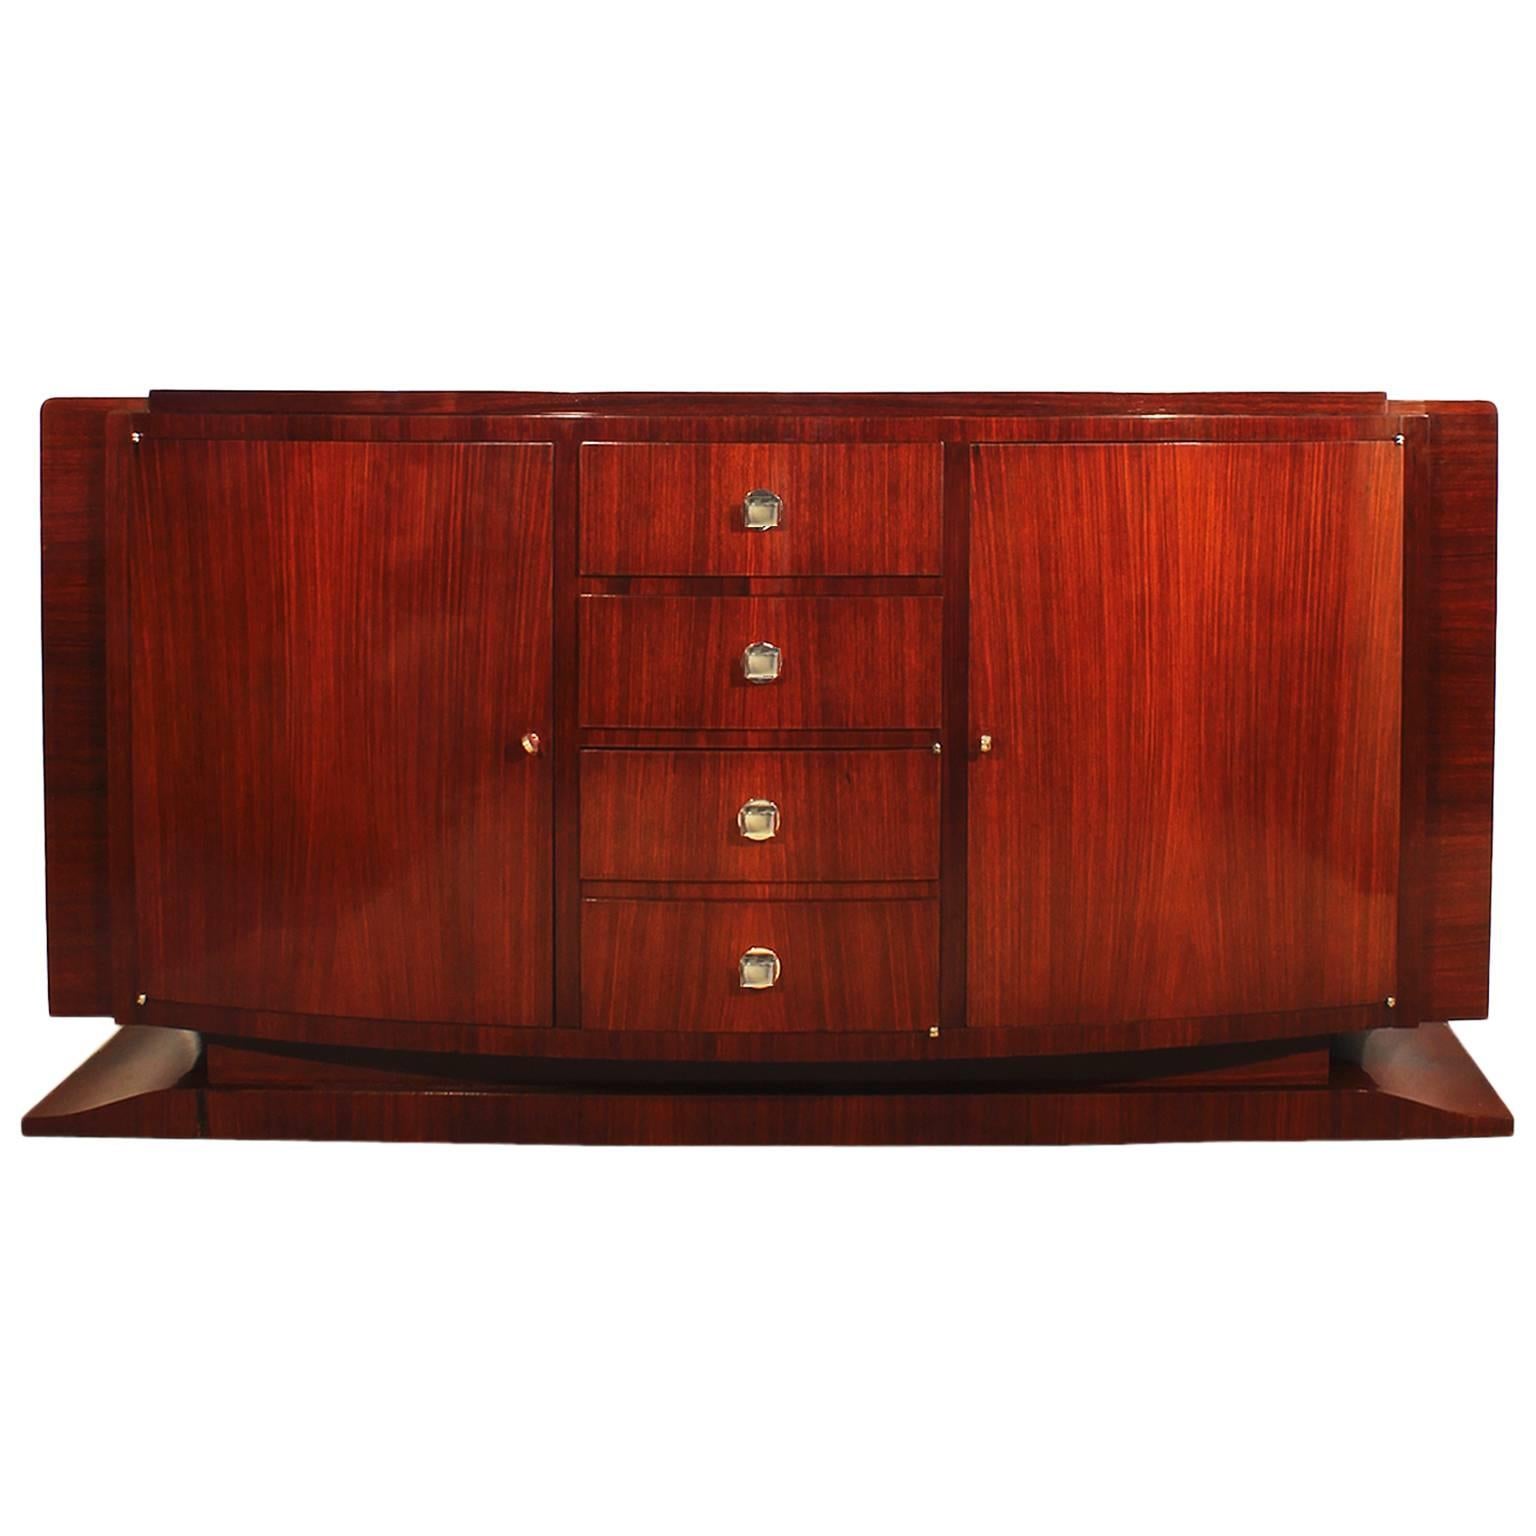 1930´s Art Deco Sideboard In Mahogany and Bronze - France